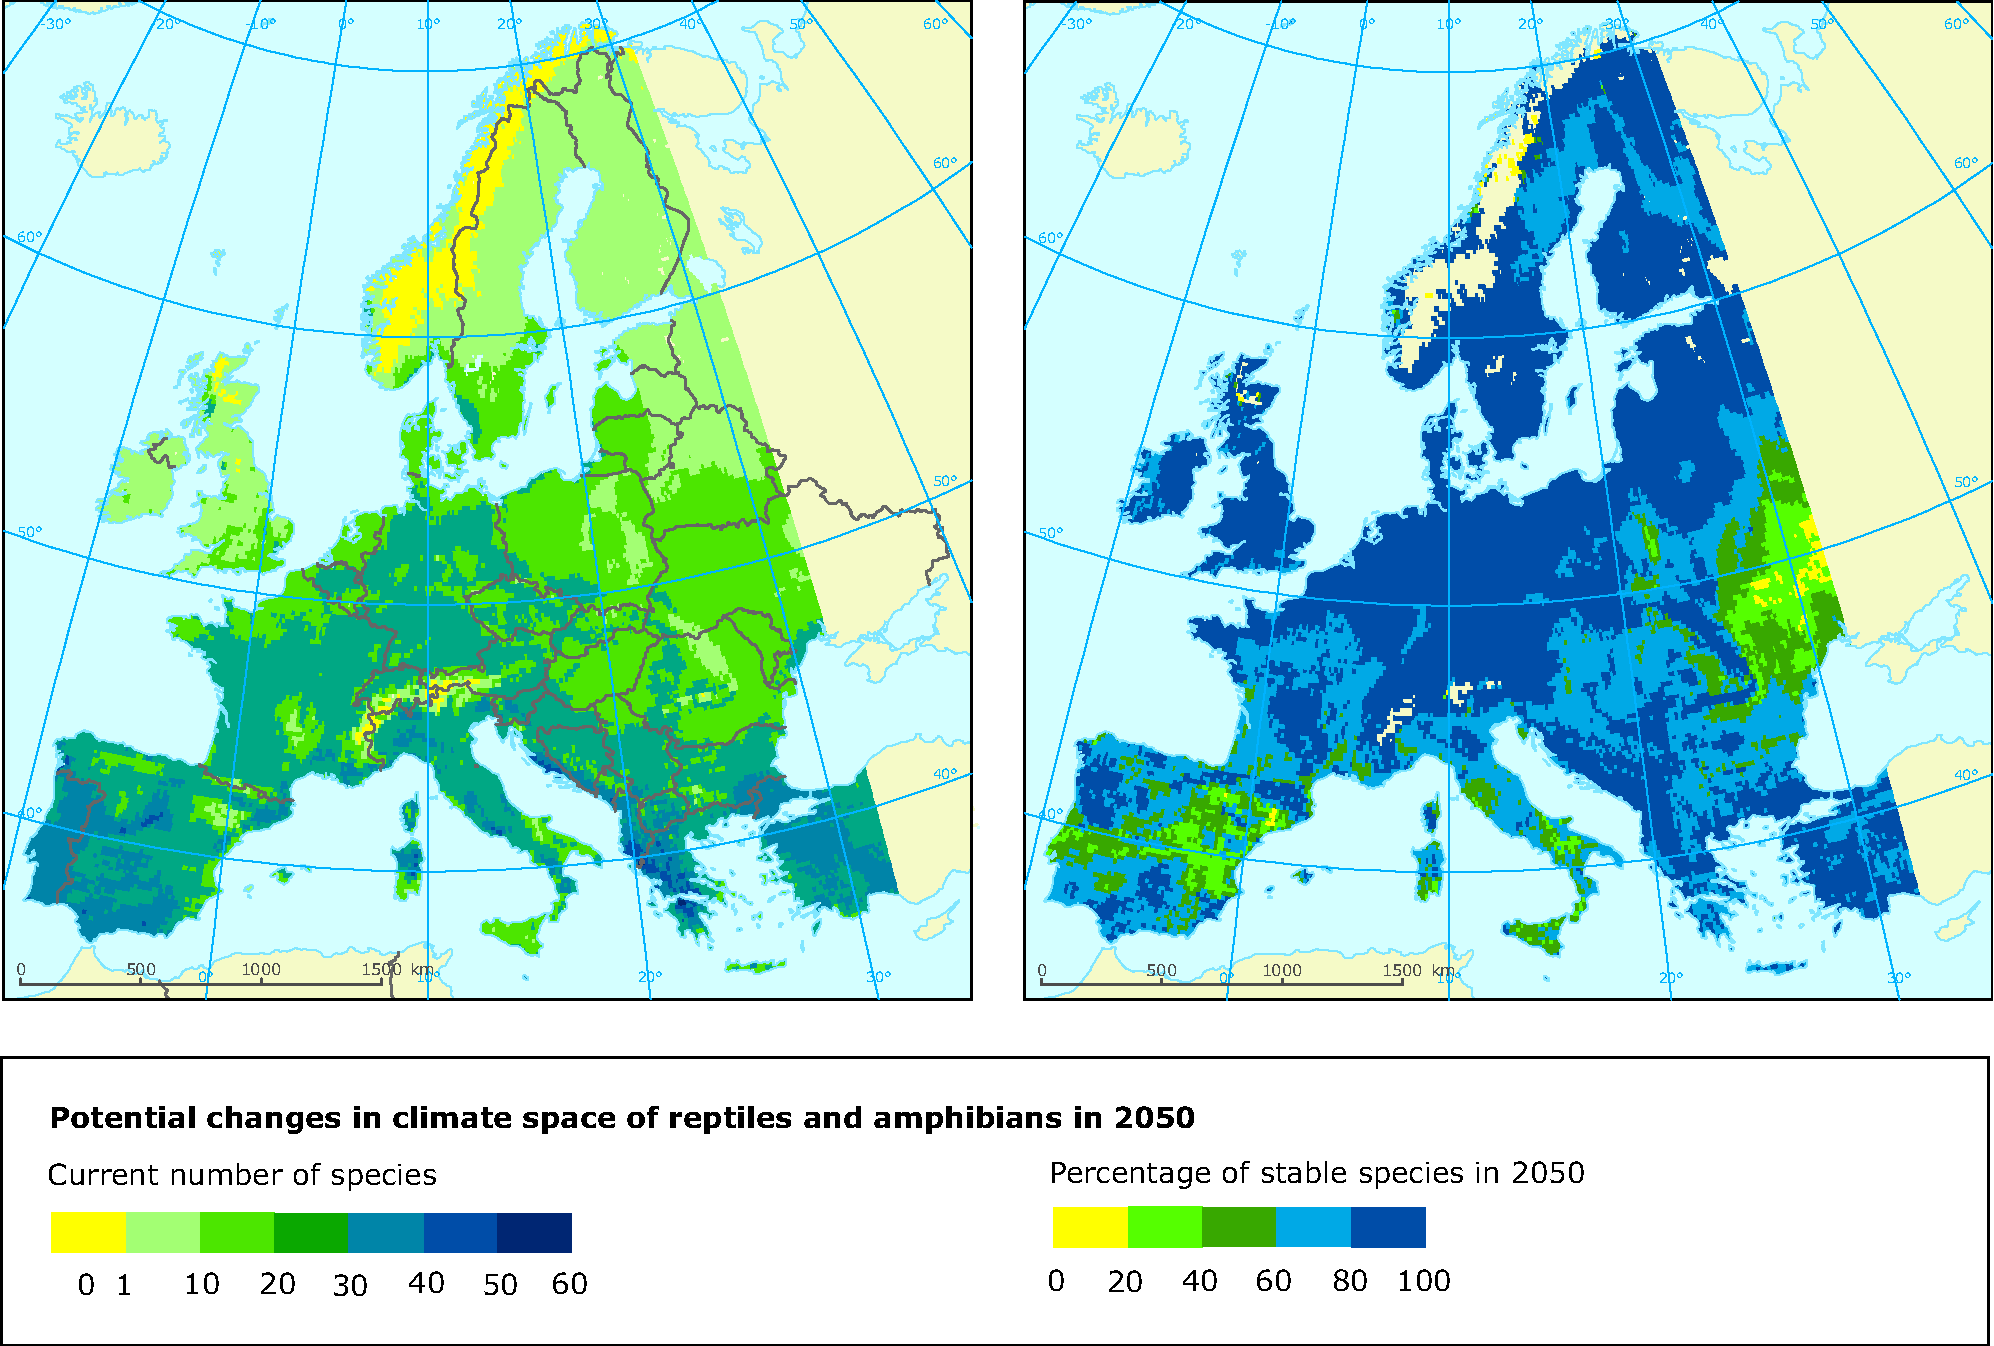 Projected impact of climate change on the potential distribution of reptiles and amphibians in 2050